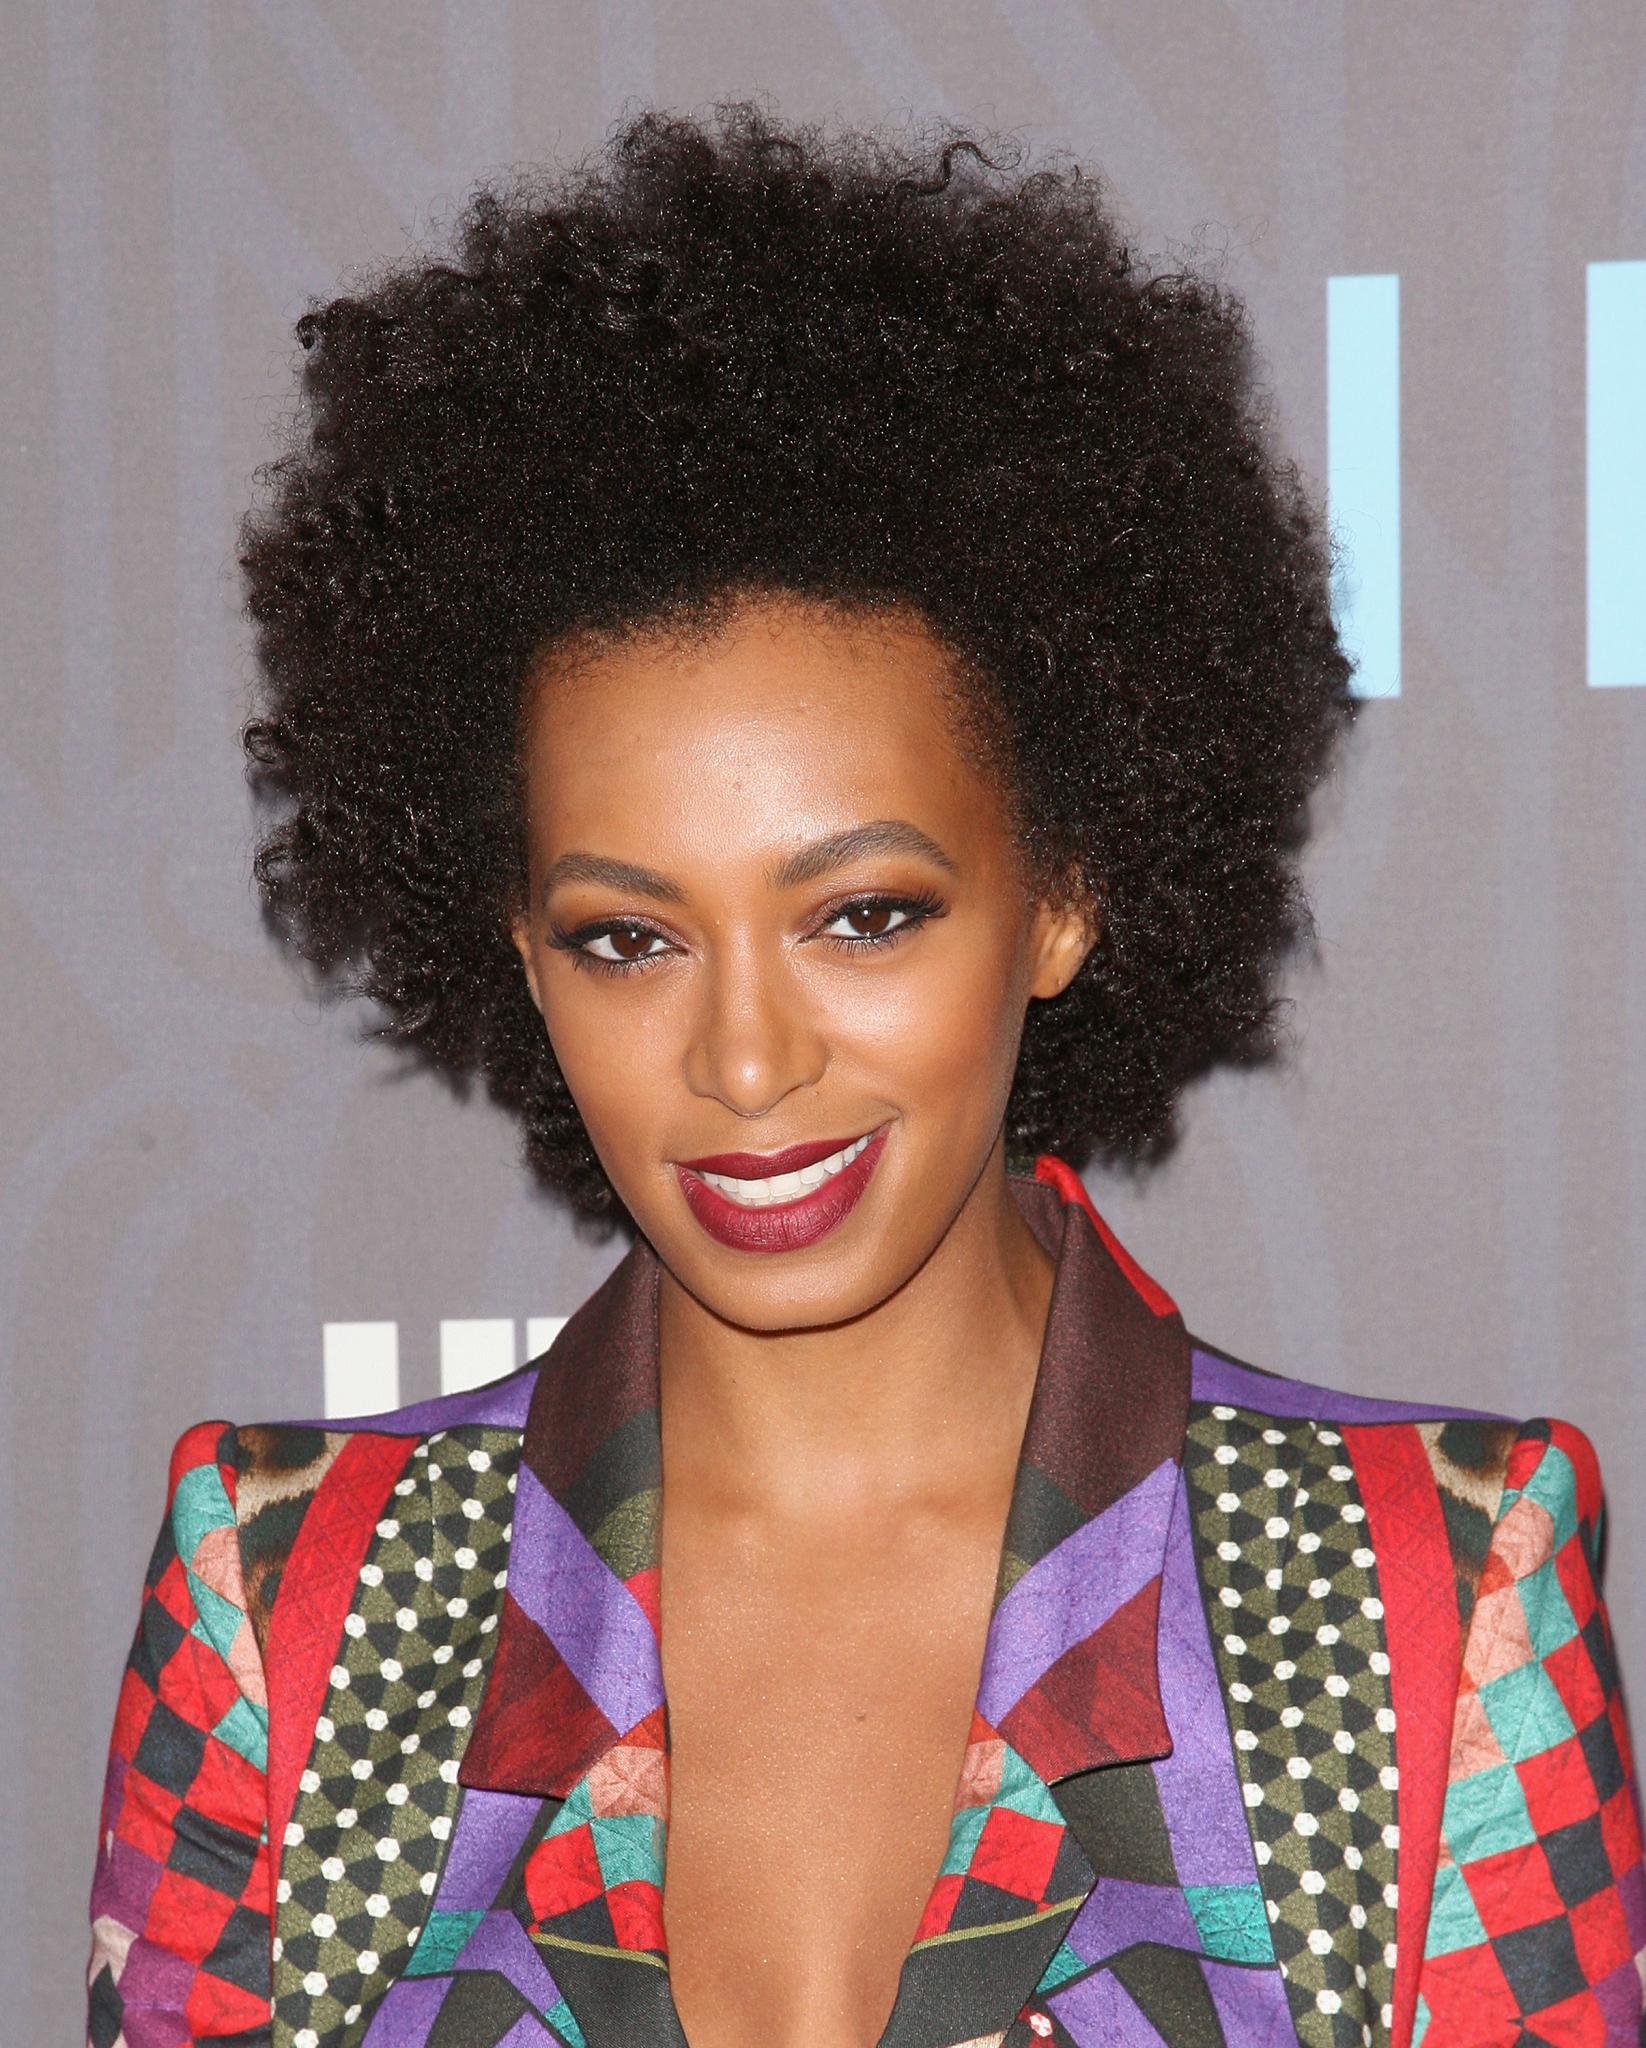 Solange Opens Up About Elevator Incident
